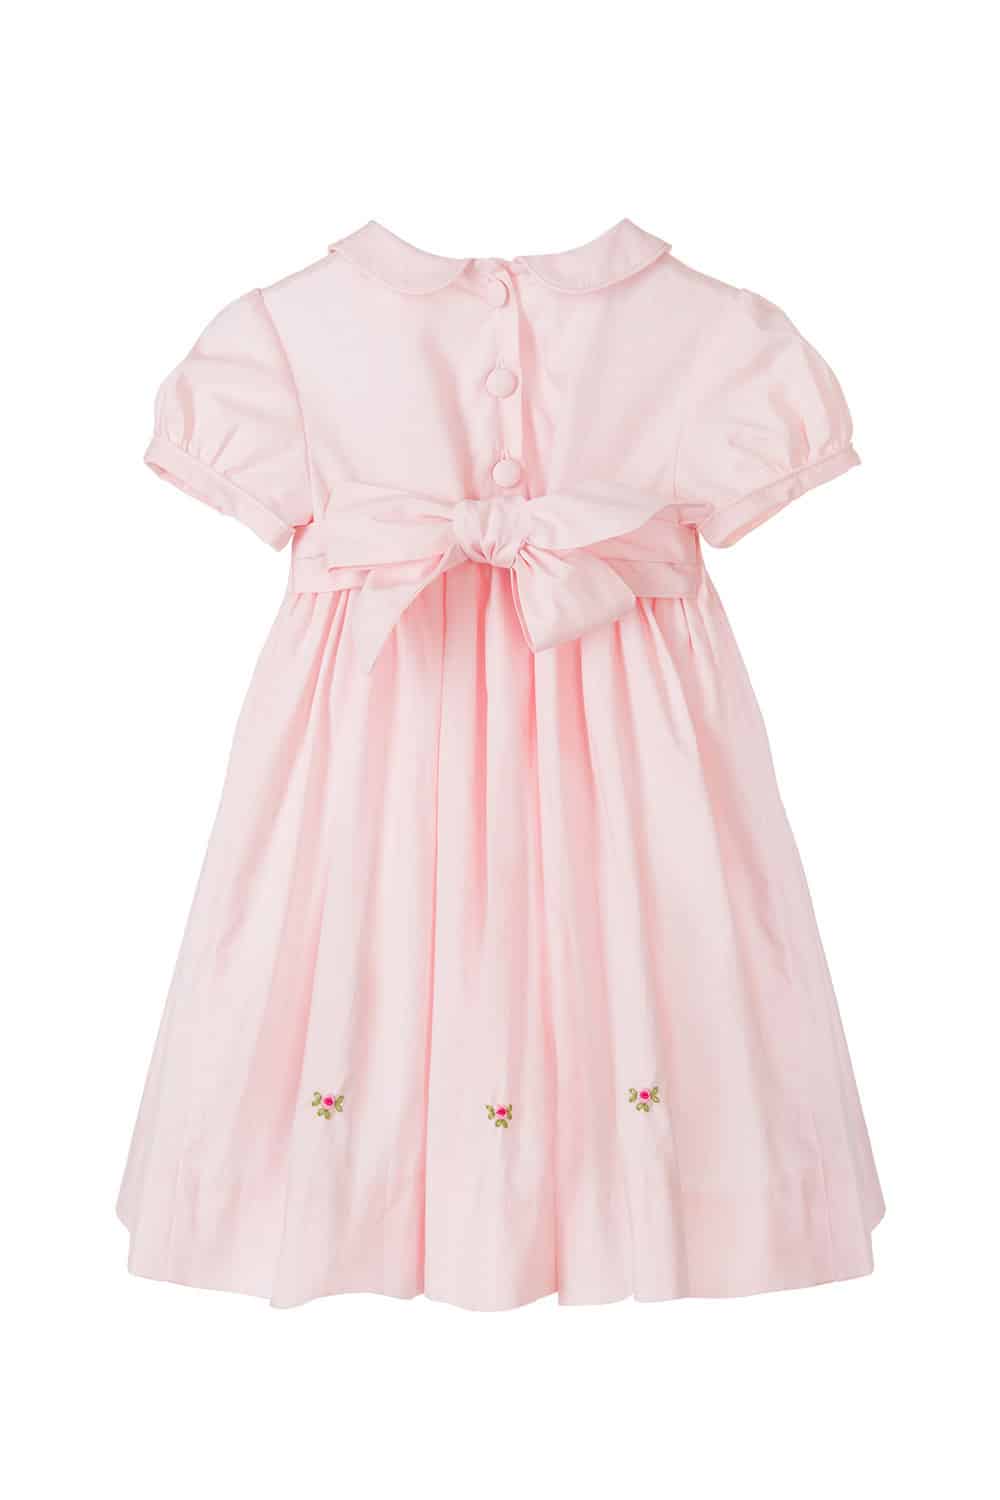 Clementine soft pink cotton summer dress with roses - Annafie